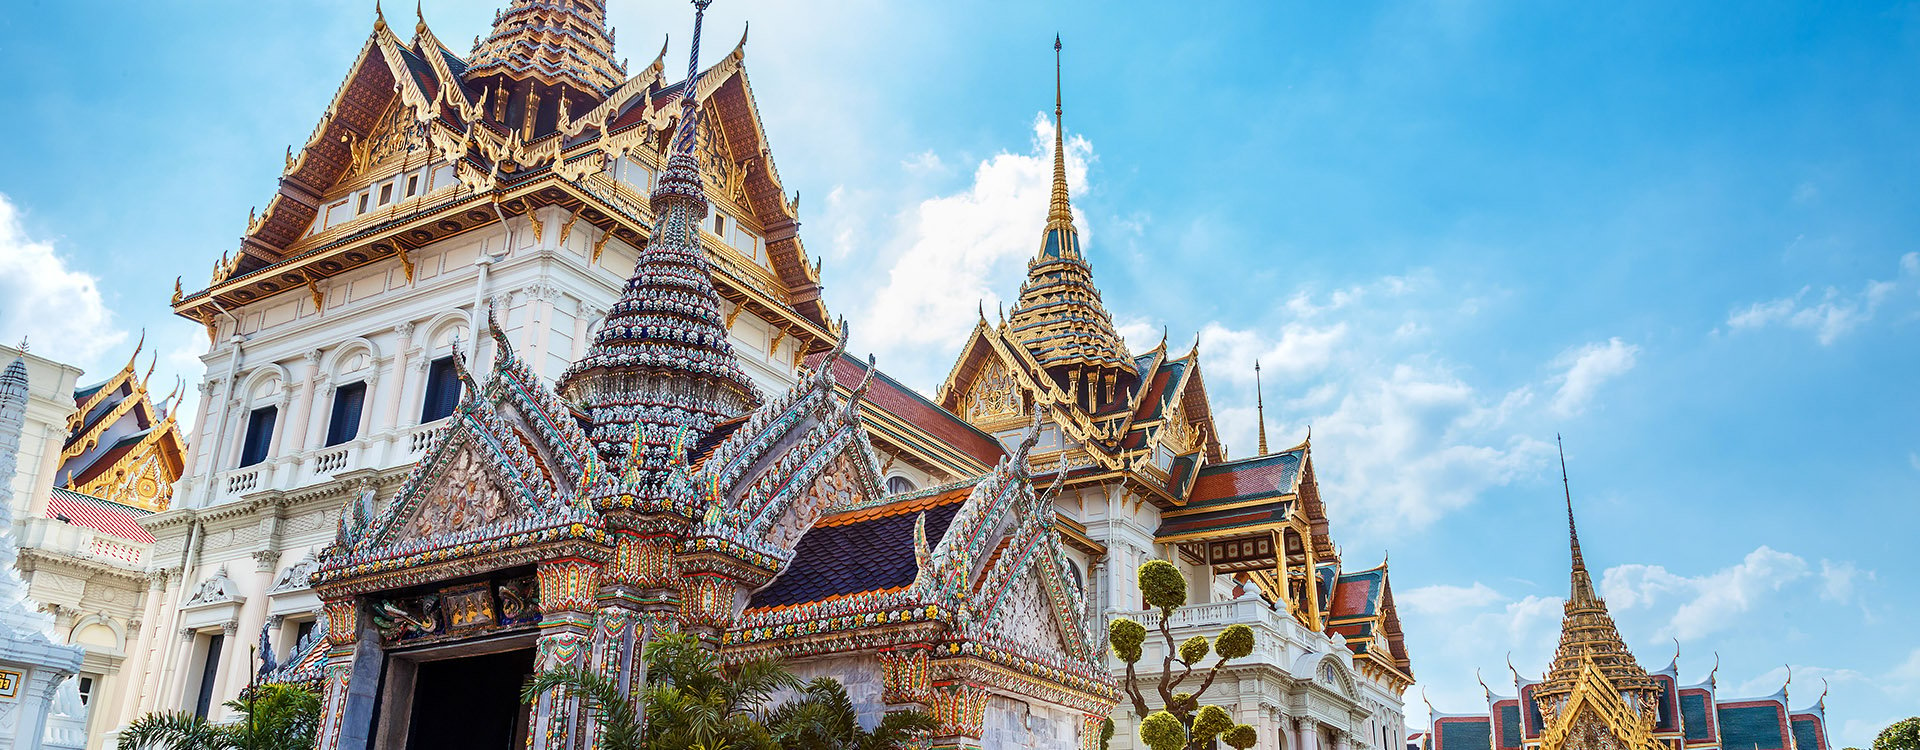 The Grand Palace of Thailand in Bangkok on a clear sunny day